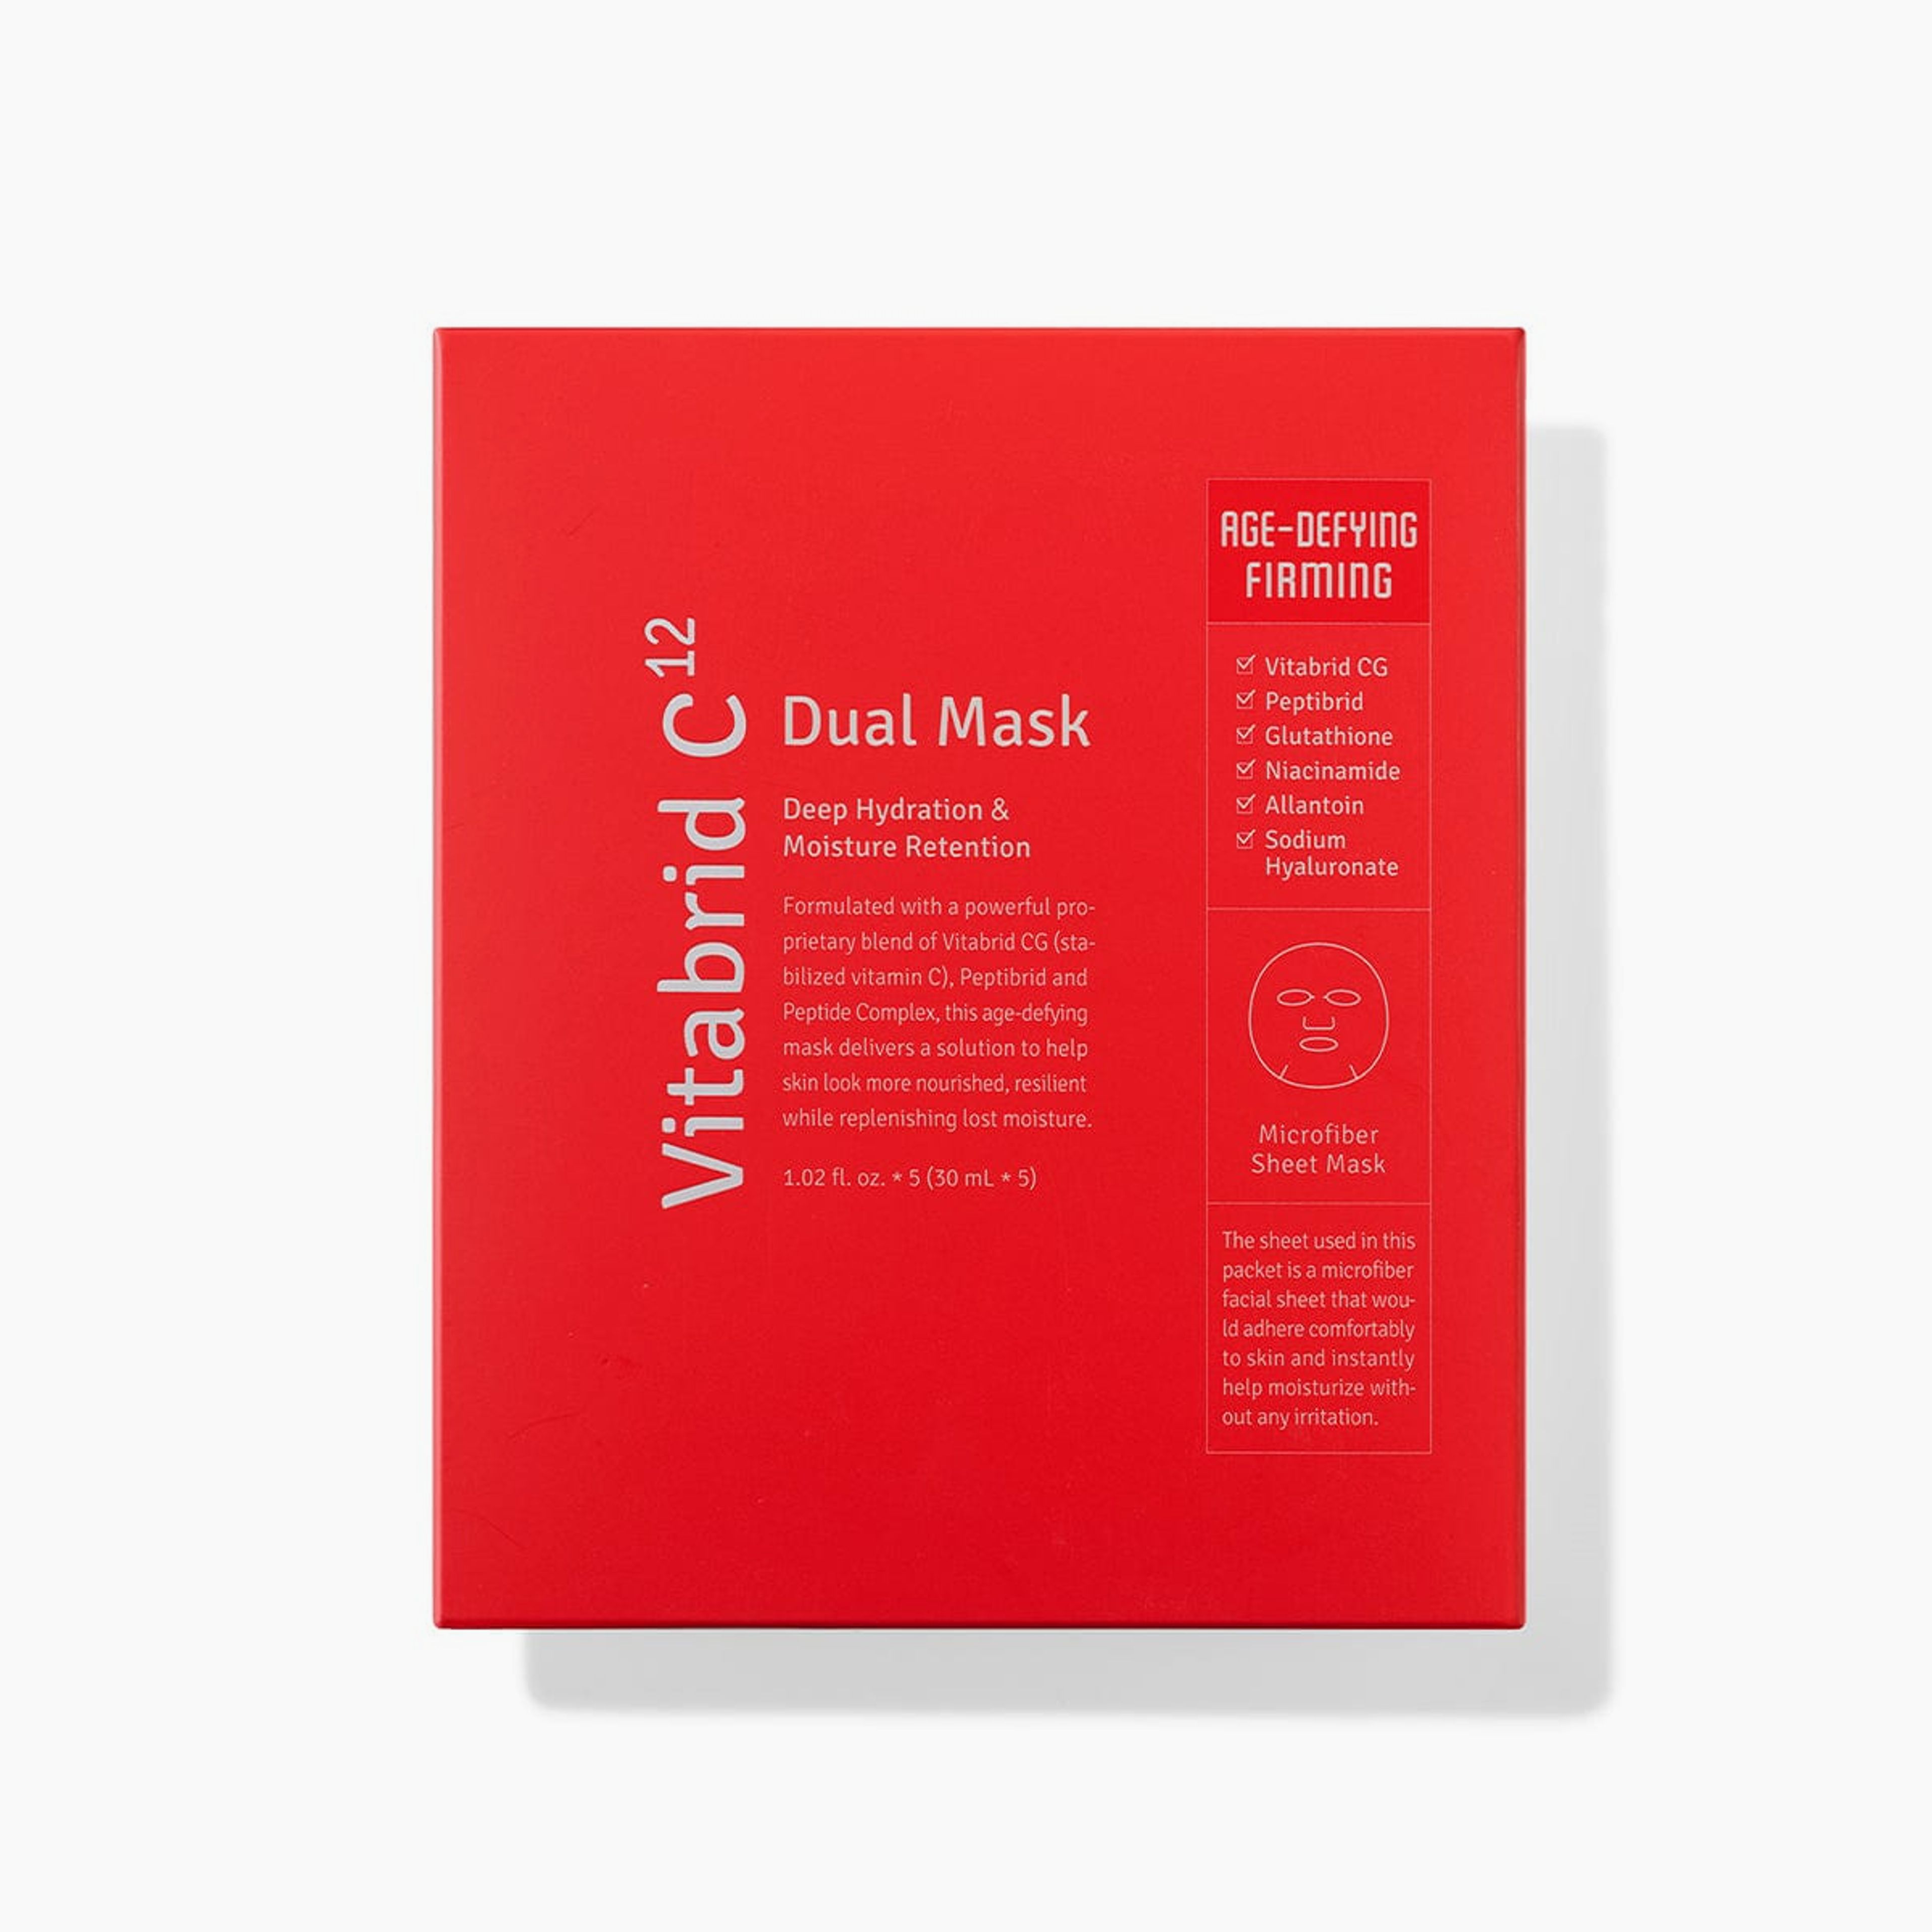 Dual Mask: Age-Defying & Firming